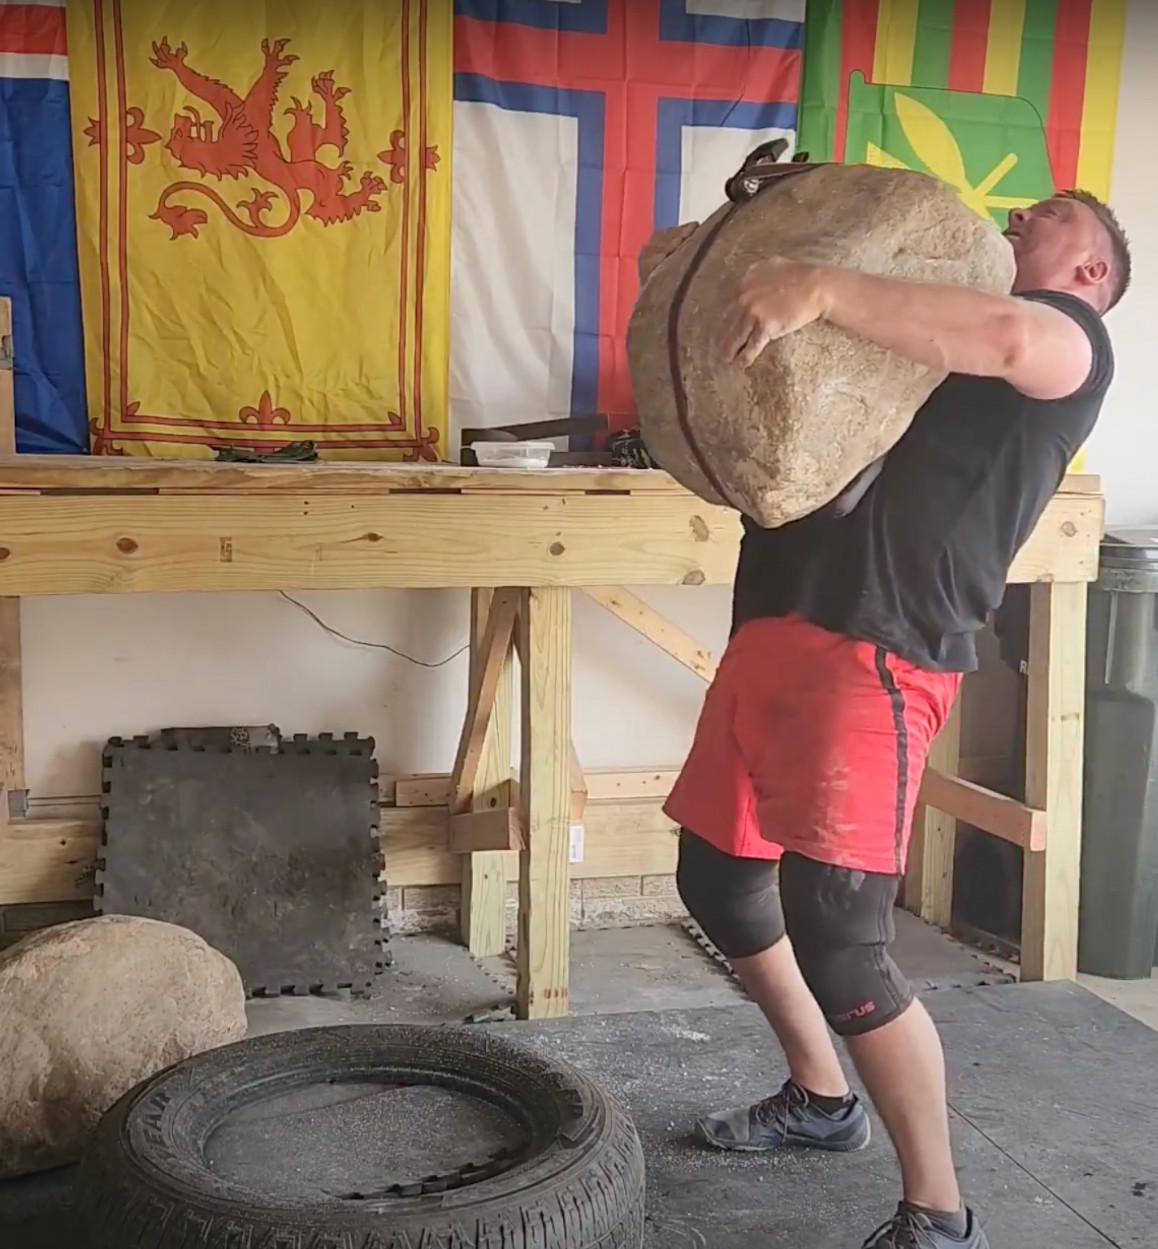 Sean lifts a 440lbs stone in training